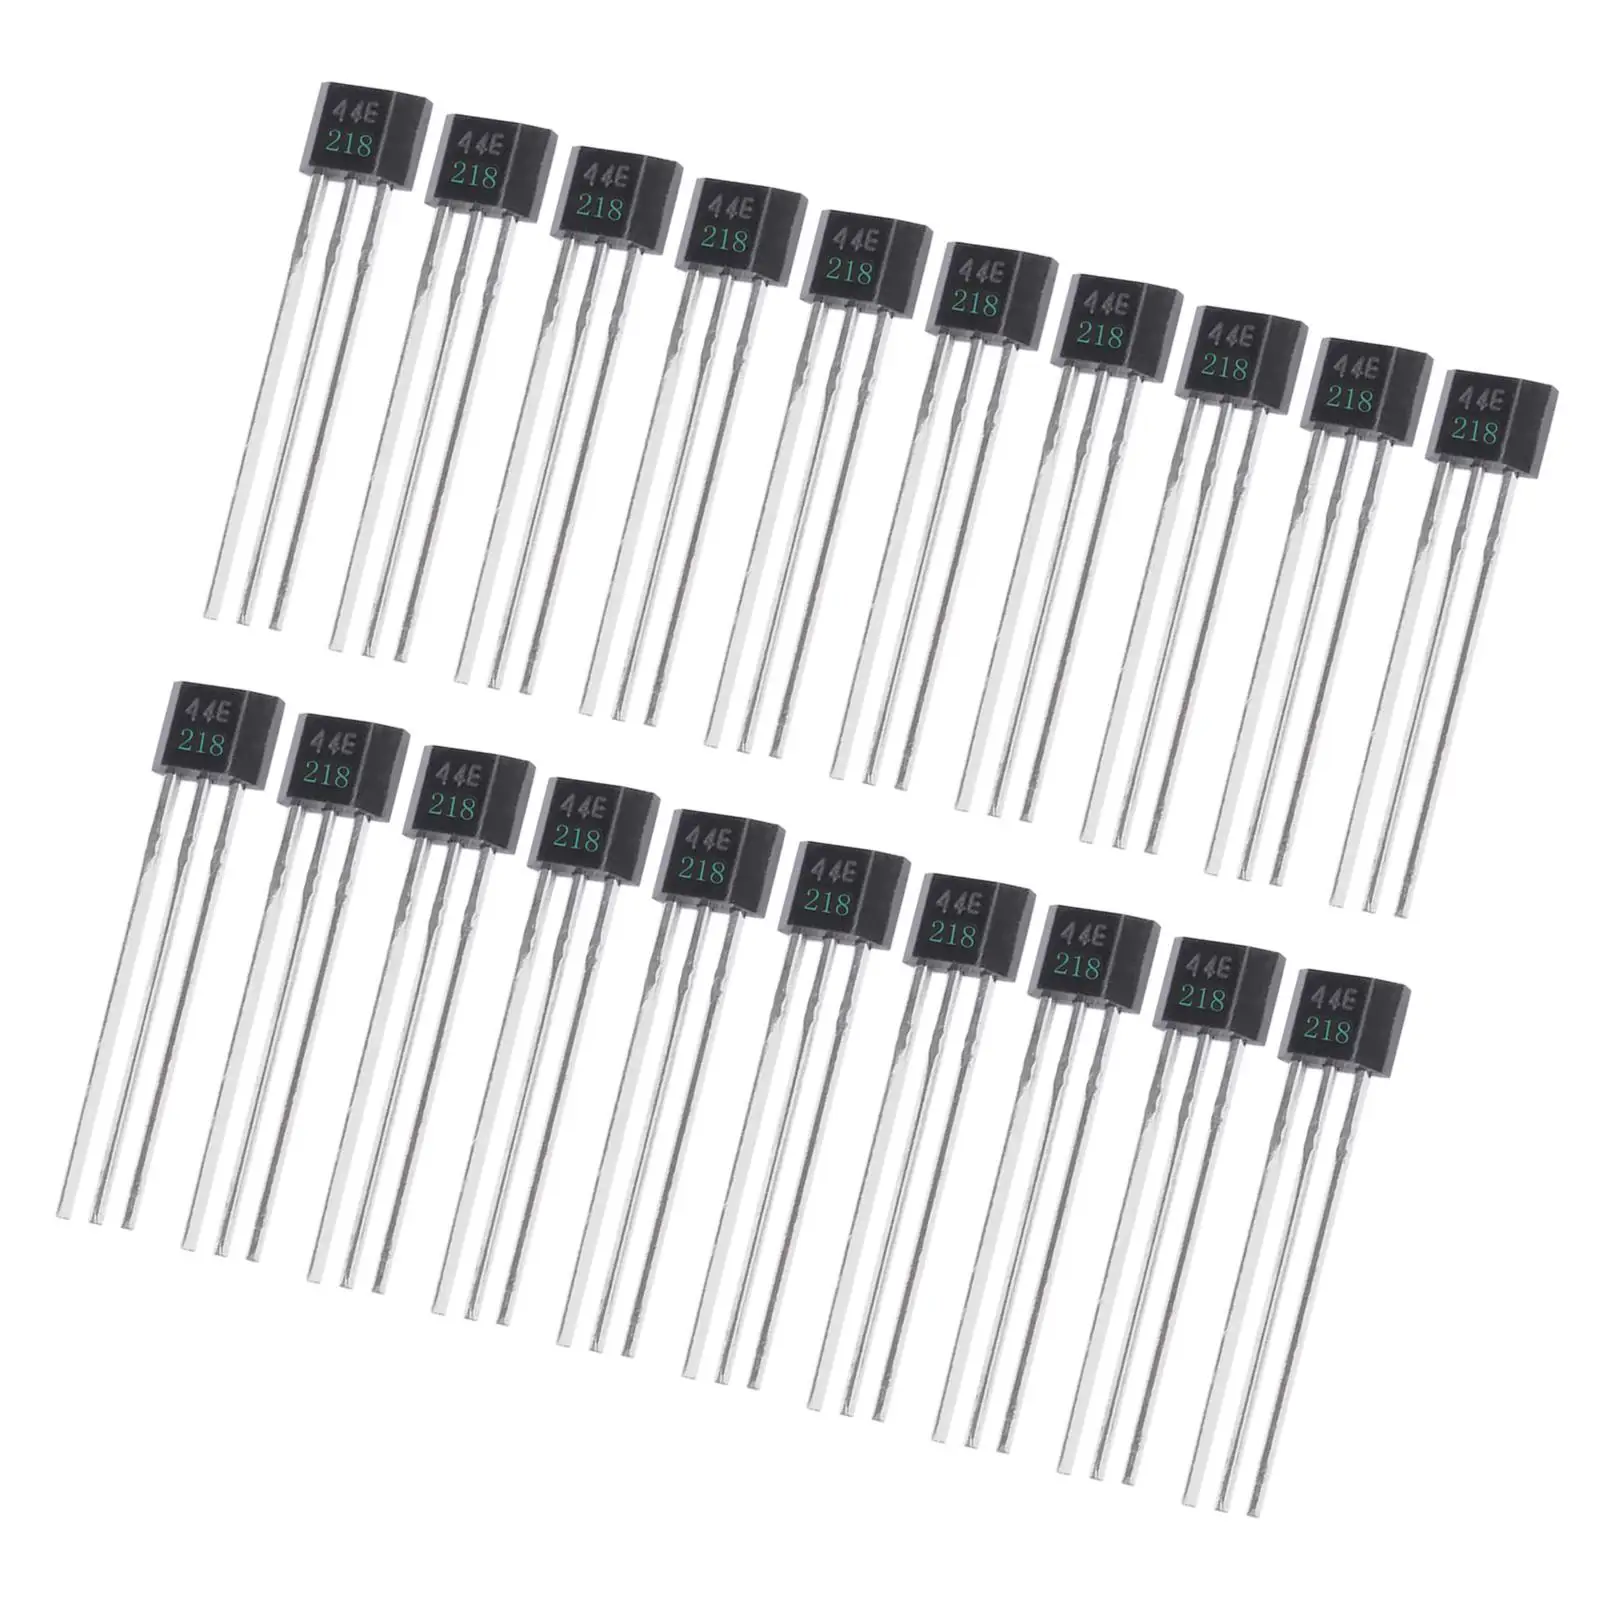 

20Pcs to-92UA 44E Hall Effect Sensor Switches Easy Installation Elements Portable for Small Household Appliances Electronic Toys